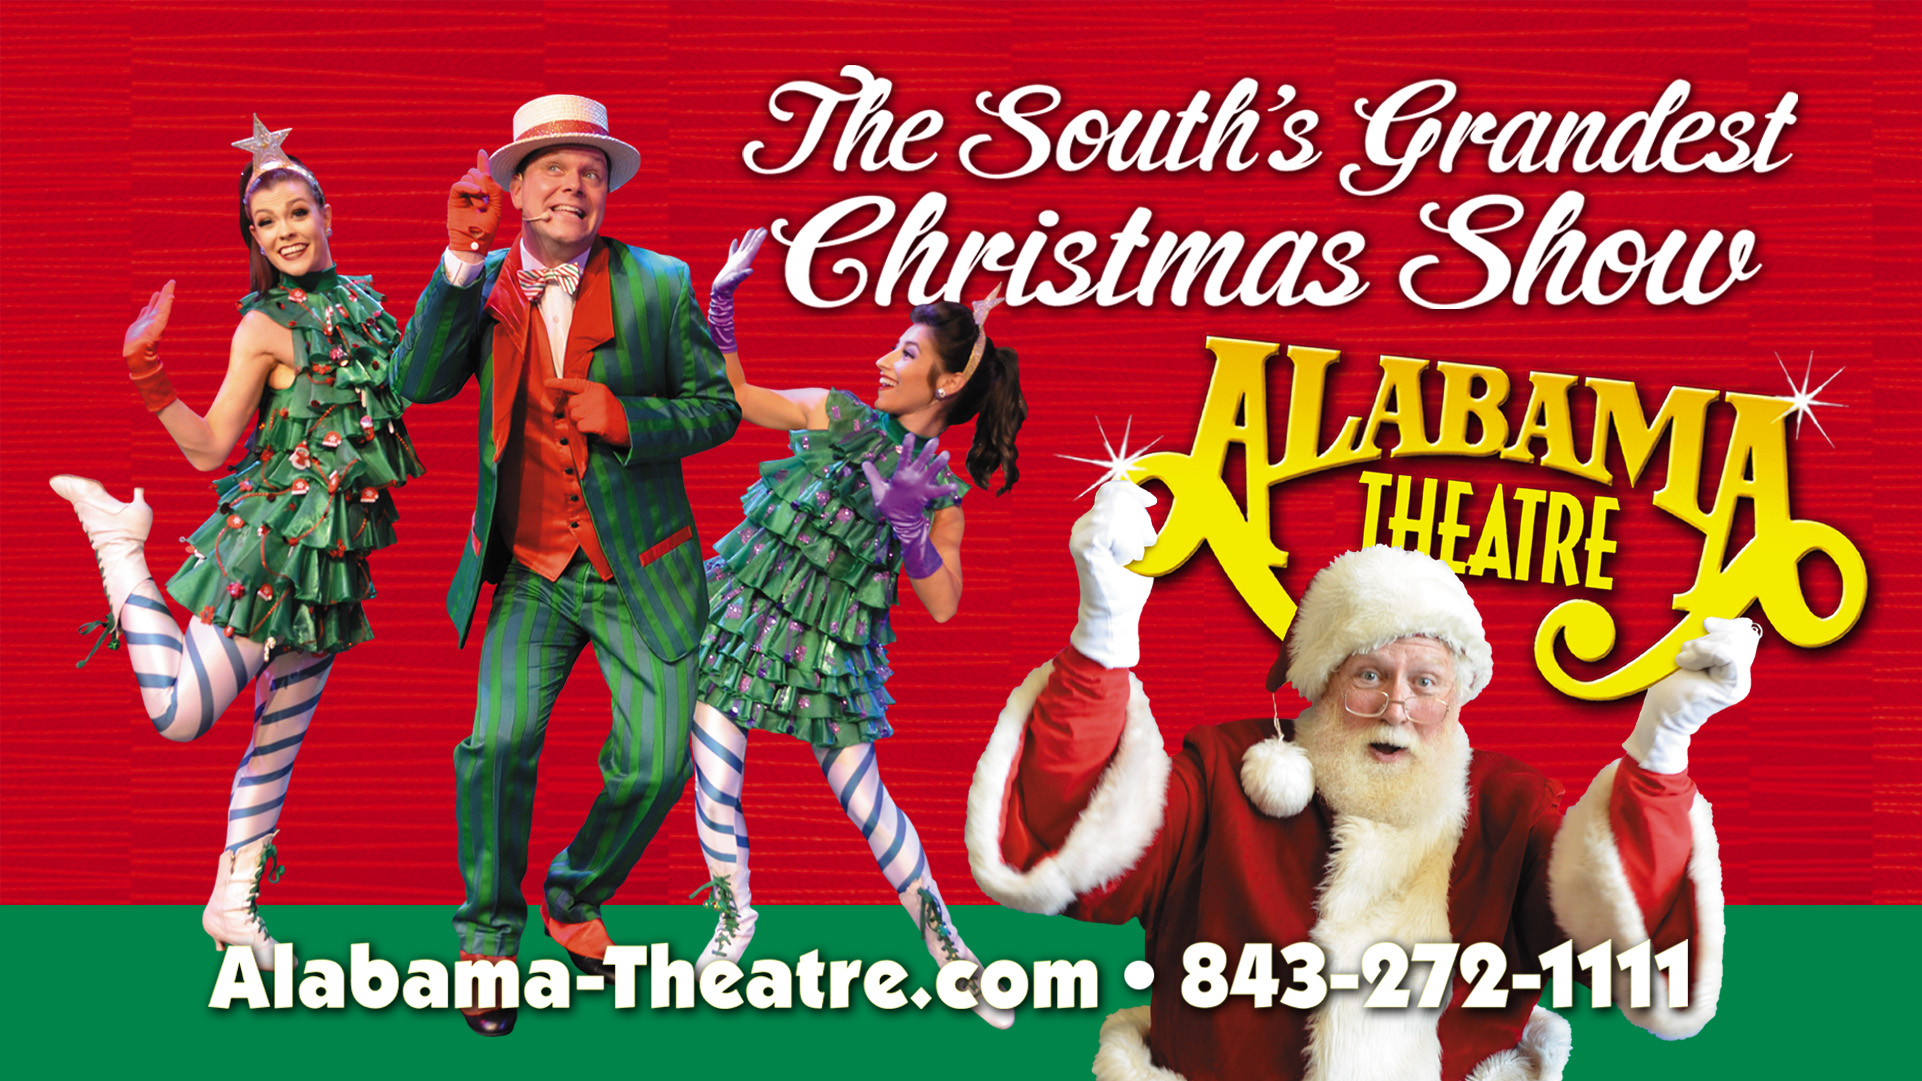 The Official Alabama Theatre Myrtle Beach's 1 Live Show Blog